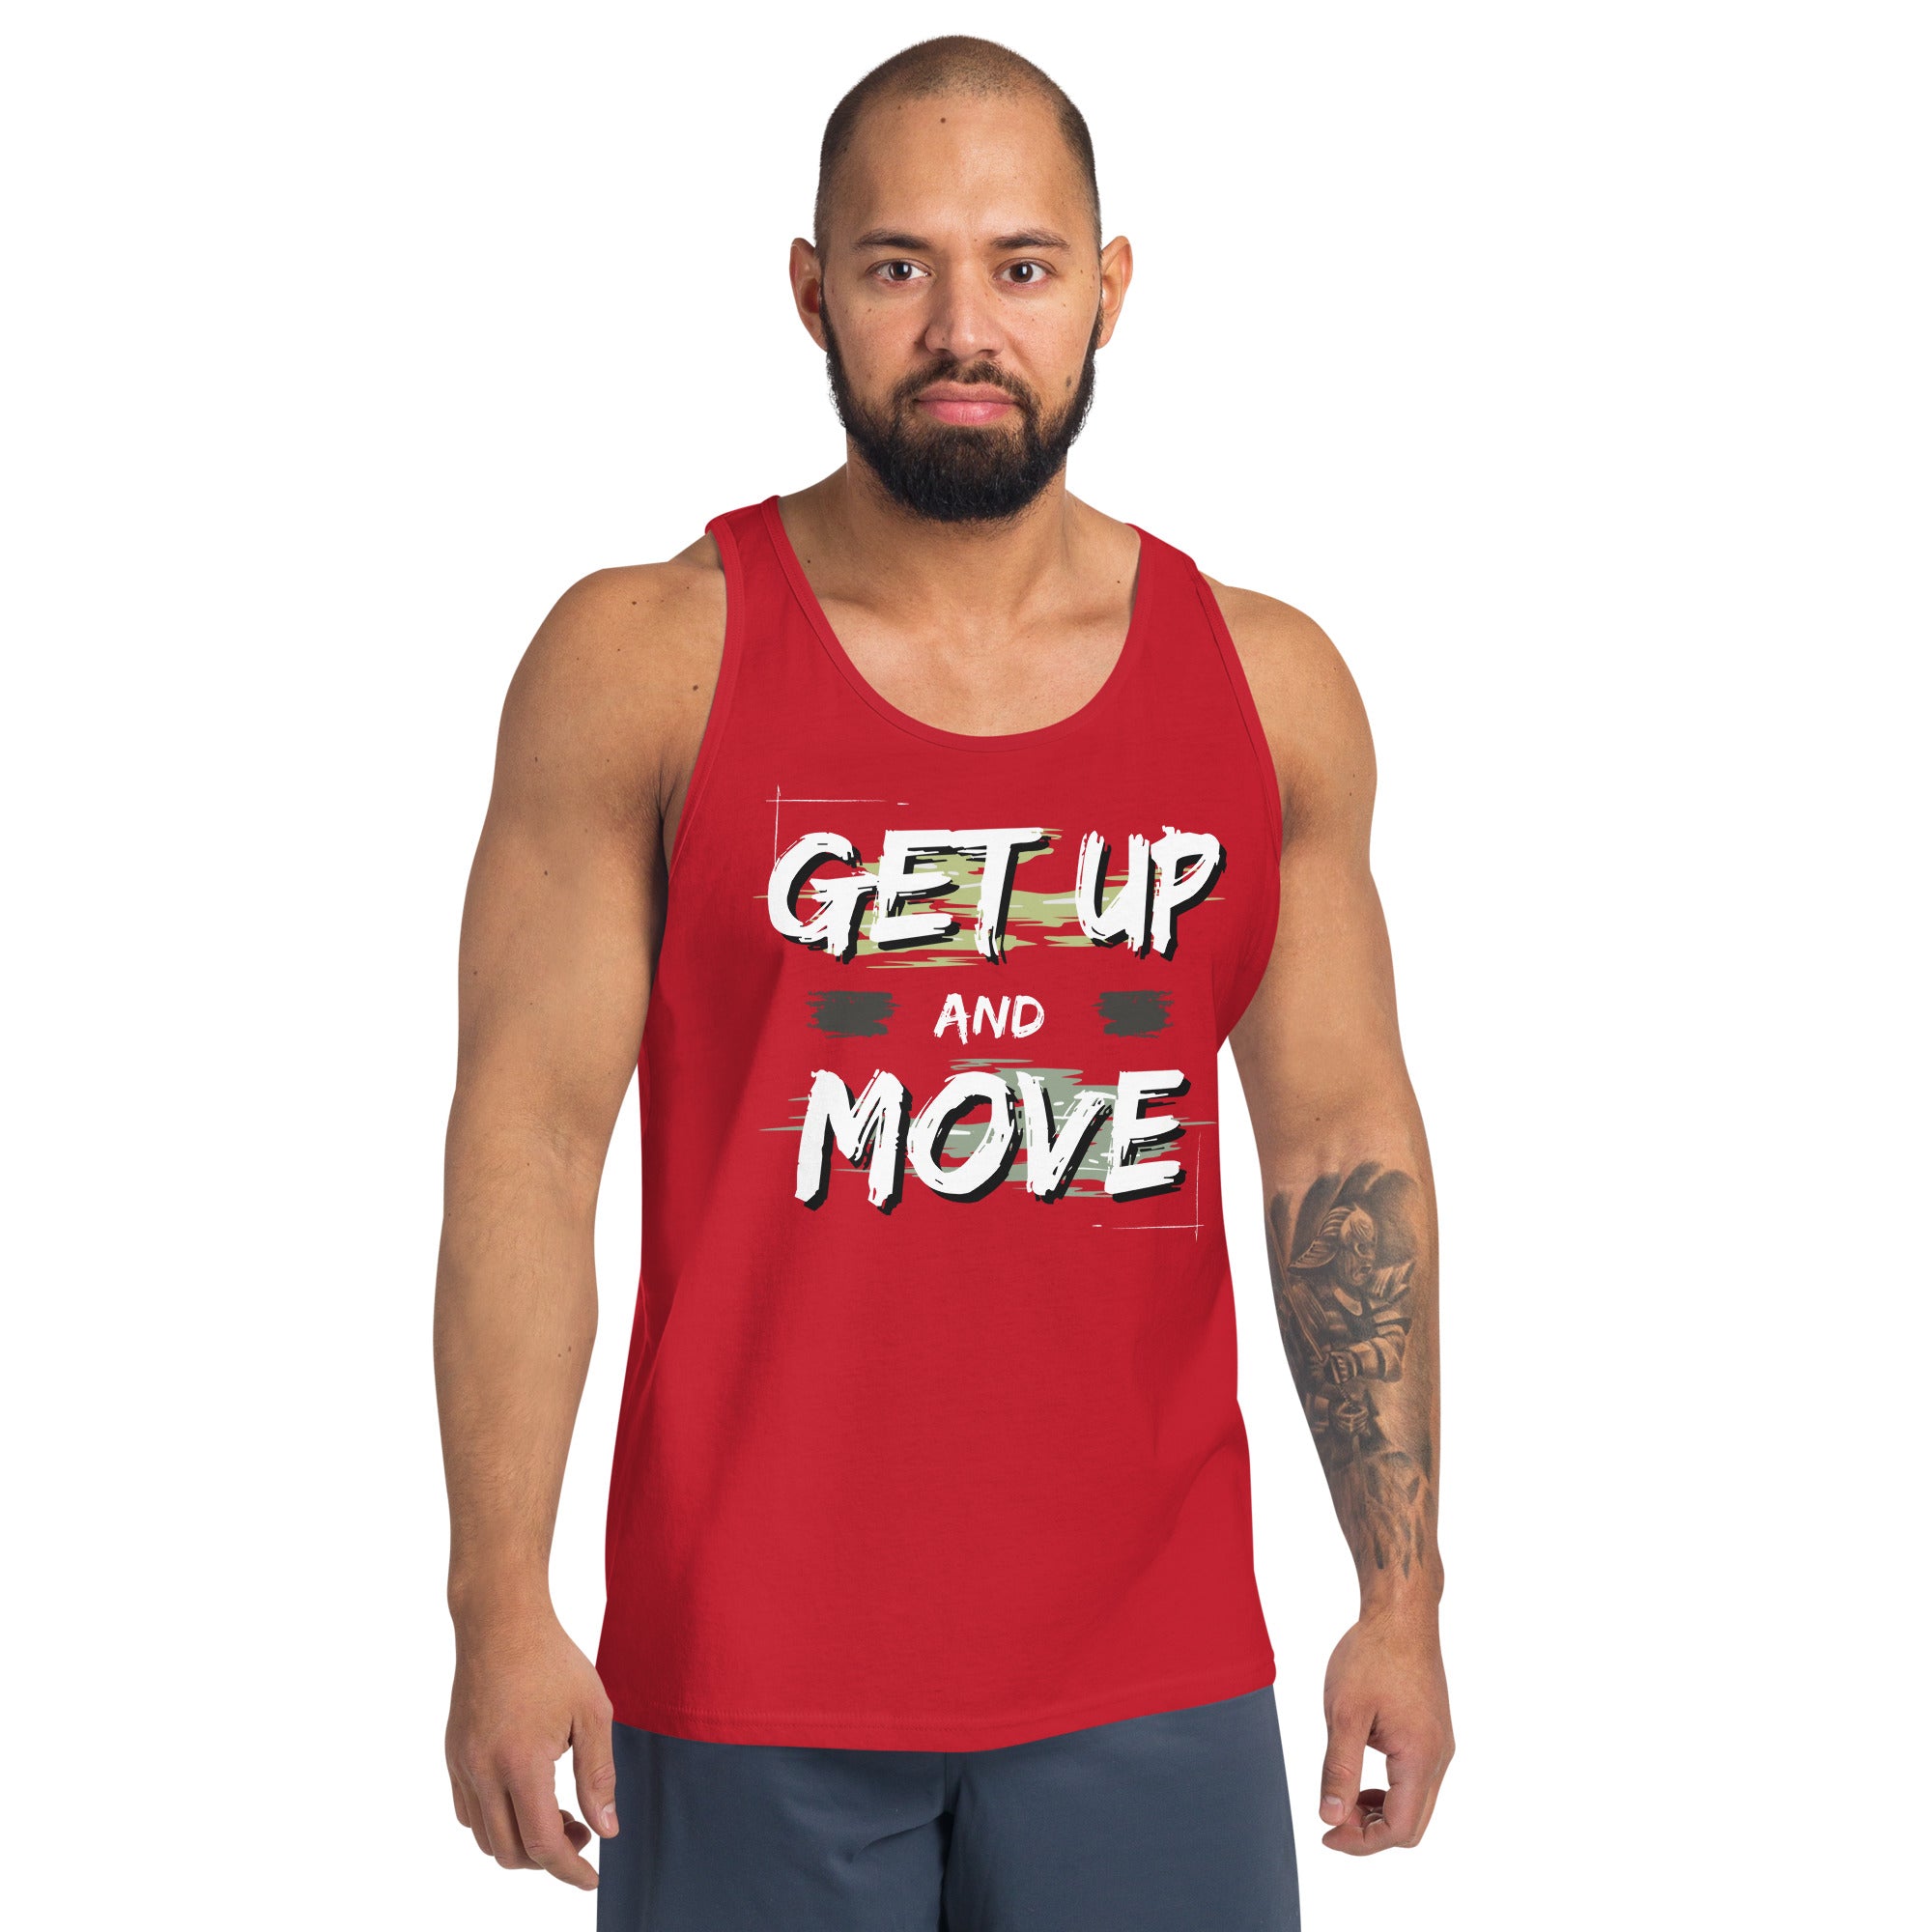 Get up and Move Top